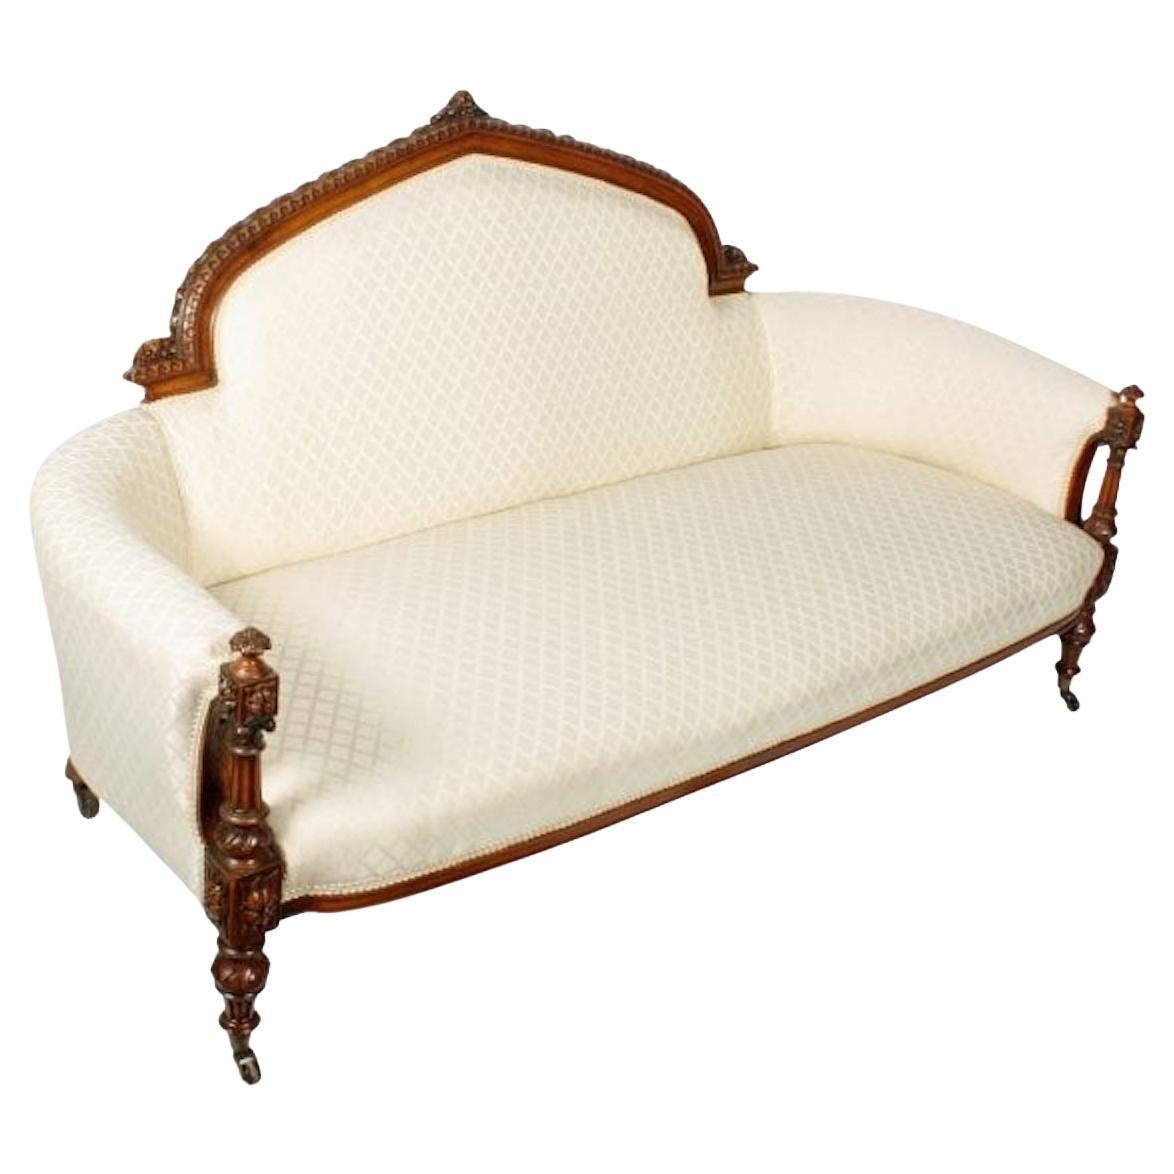 Victorian carved walnut settee

A mid-19th century Victorian carved walnut settee.

The settee has a domed back with a highly decorative carved walnut frame and is upholstered in a cream coloured contemporary material.

The front legs are